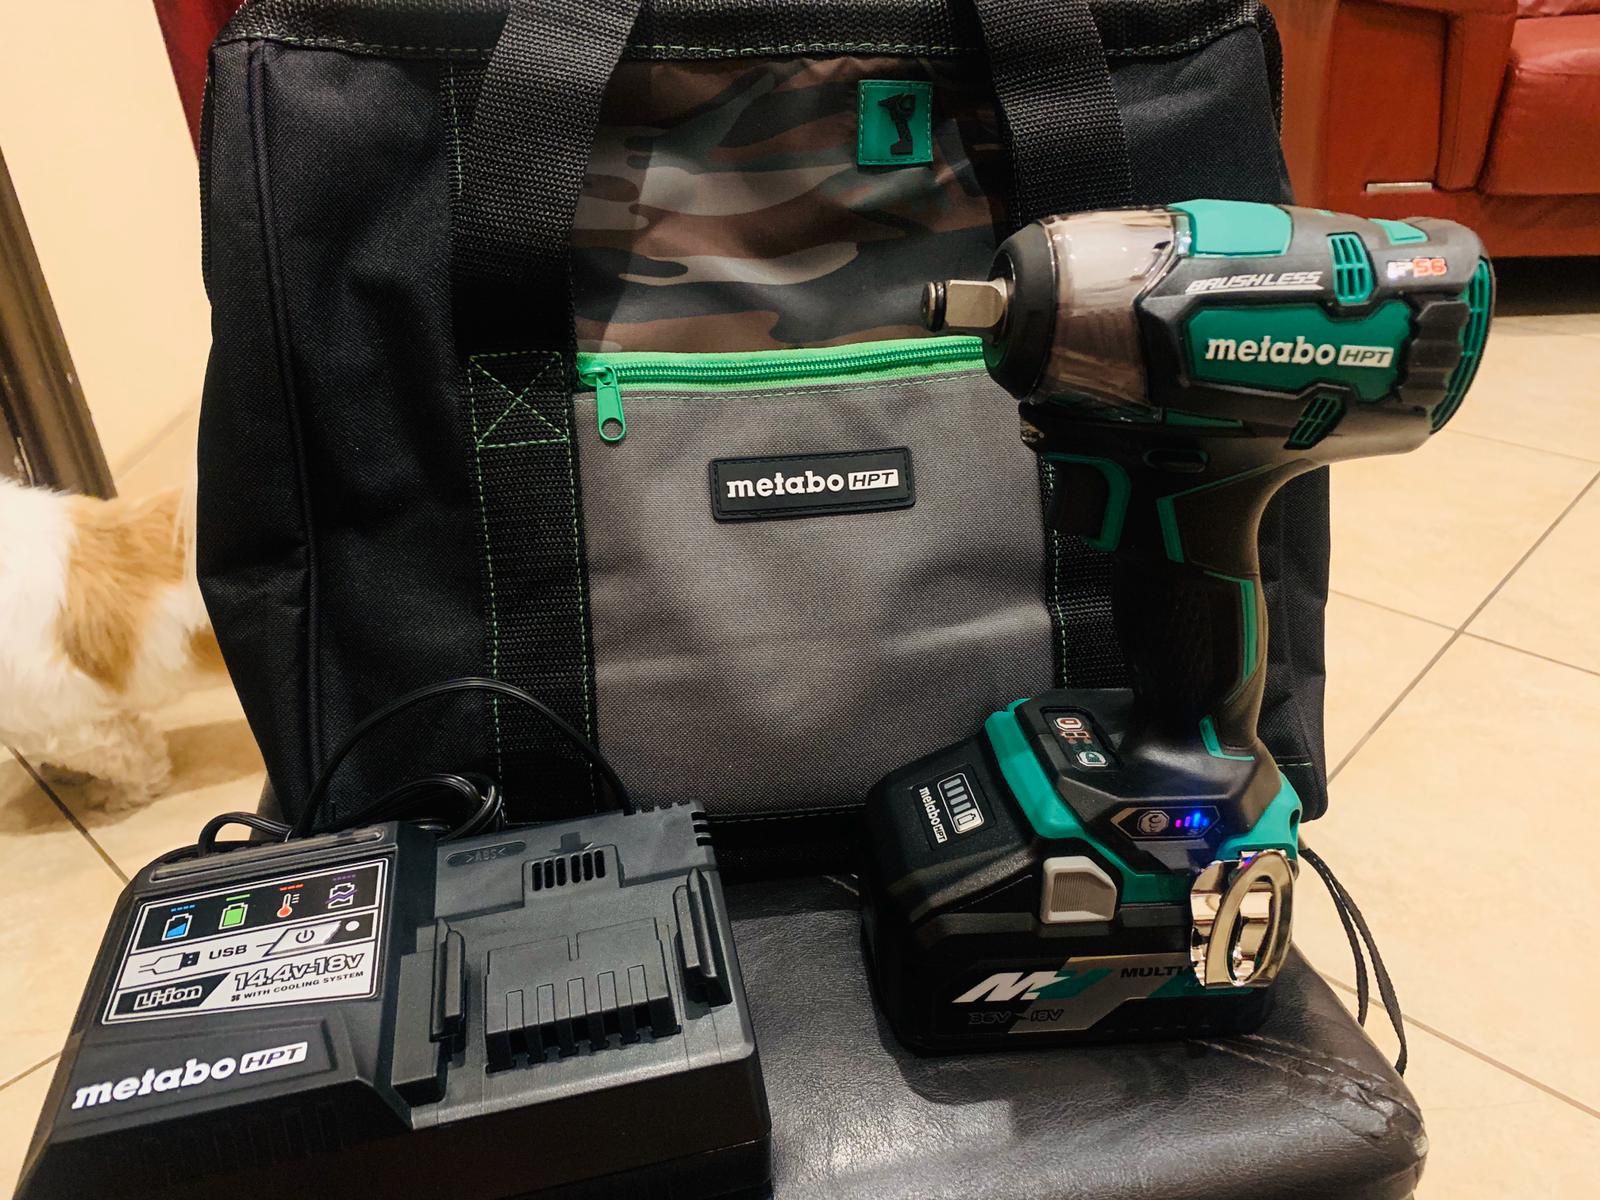 Metabo (hitachi) 1/2 inch impact with big 36v battery charger and bag